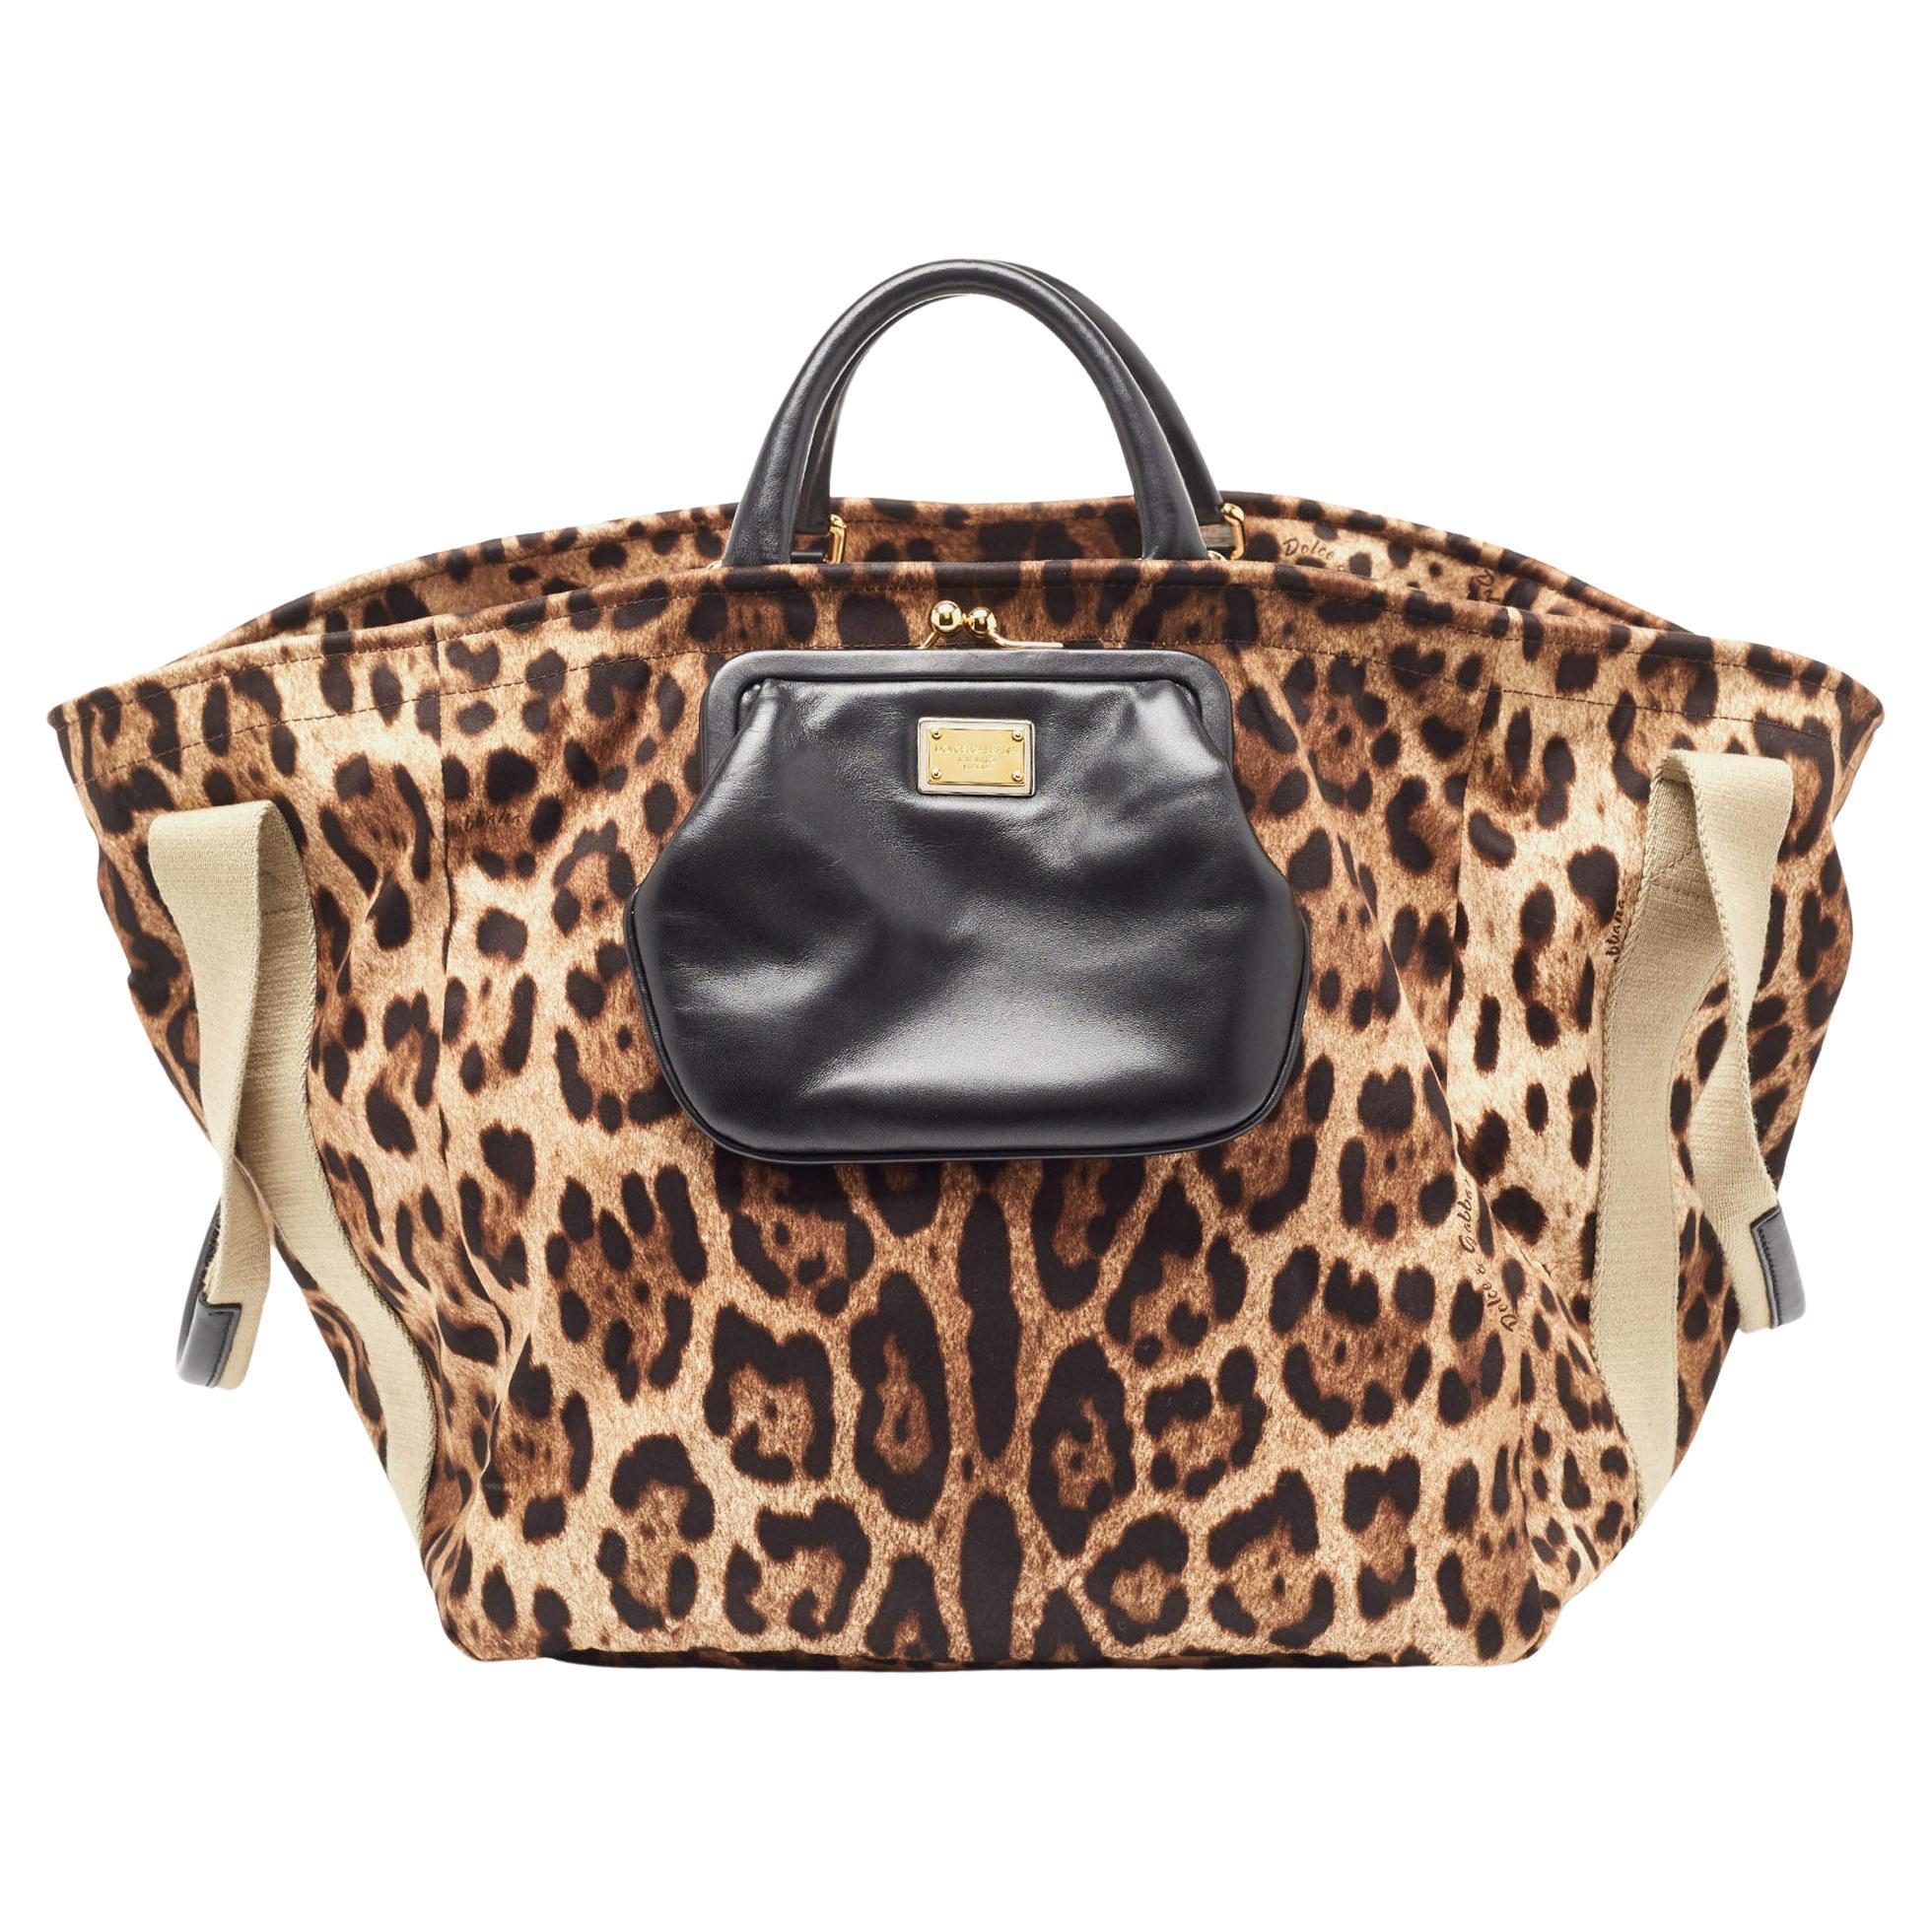 Dolce & Gabbana Beige Brown/Black Leopard Print Fabric Front Pouch Tote